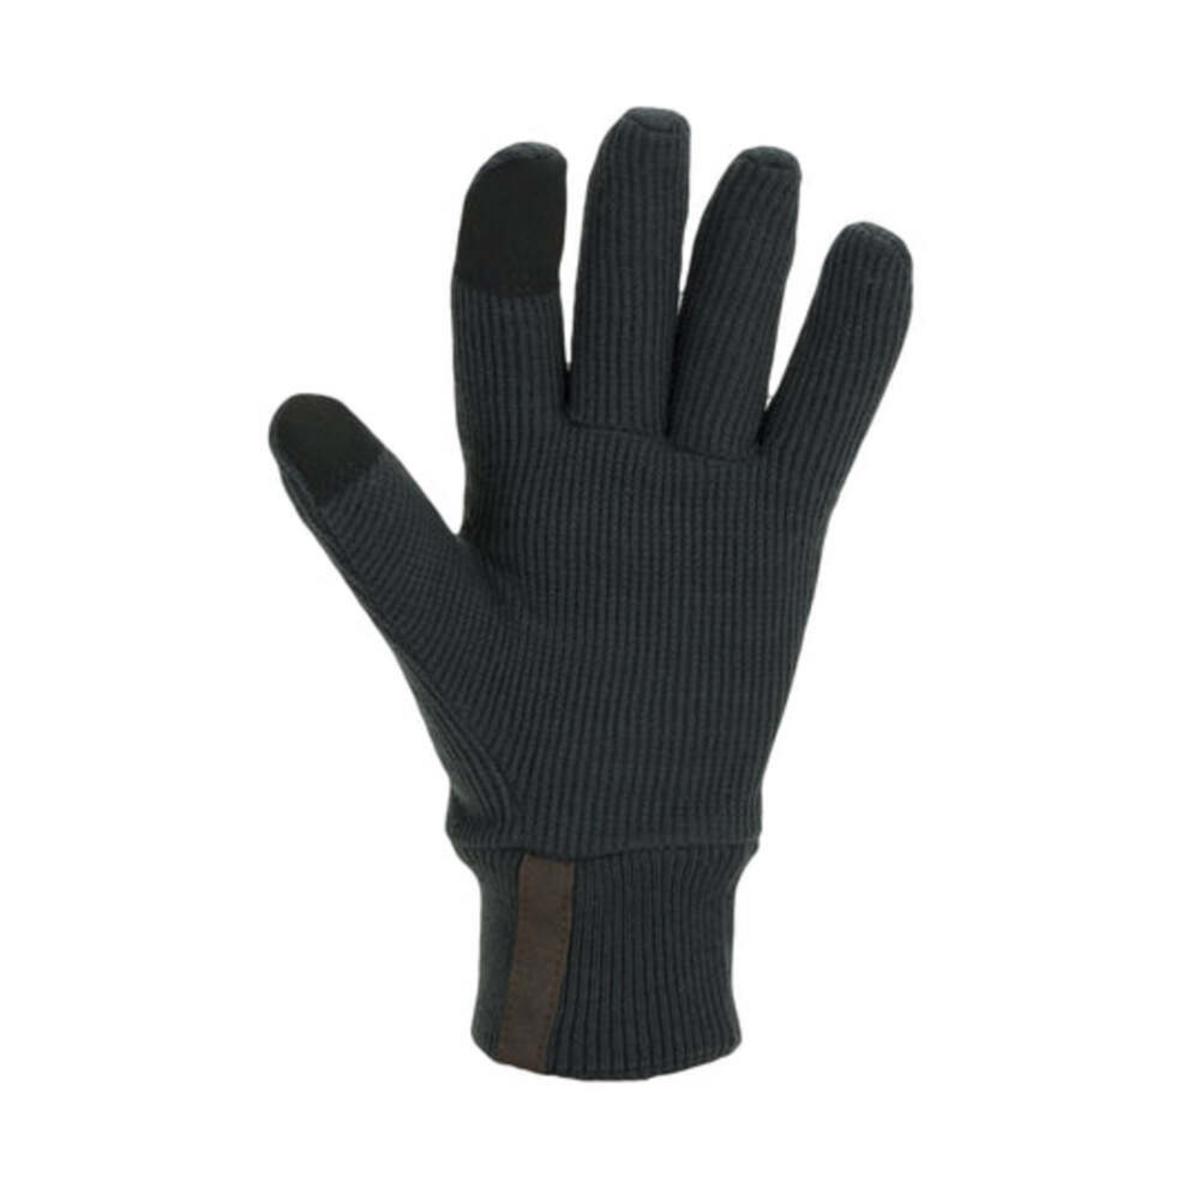 SealSkinz Necton Windproof All Weather Knitted Gloves